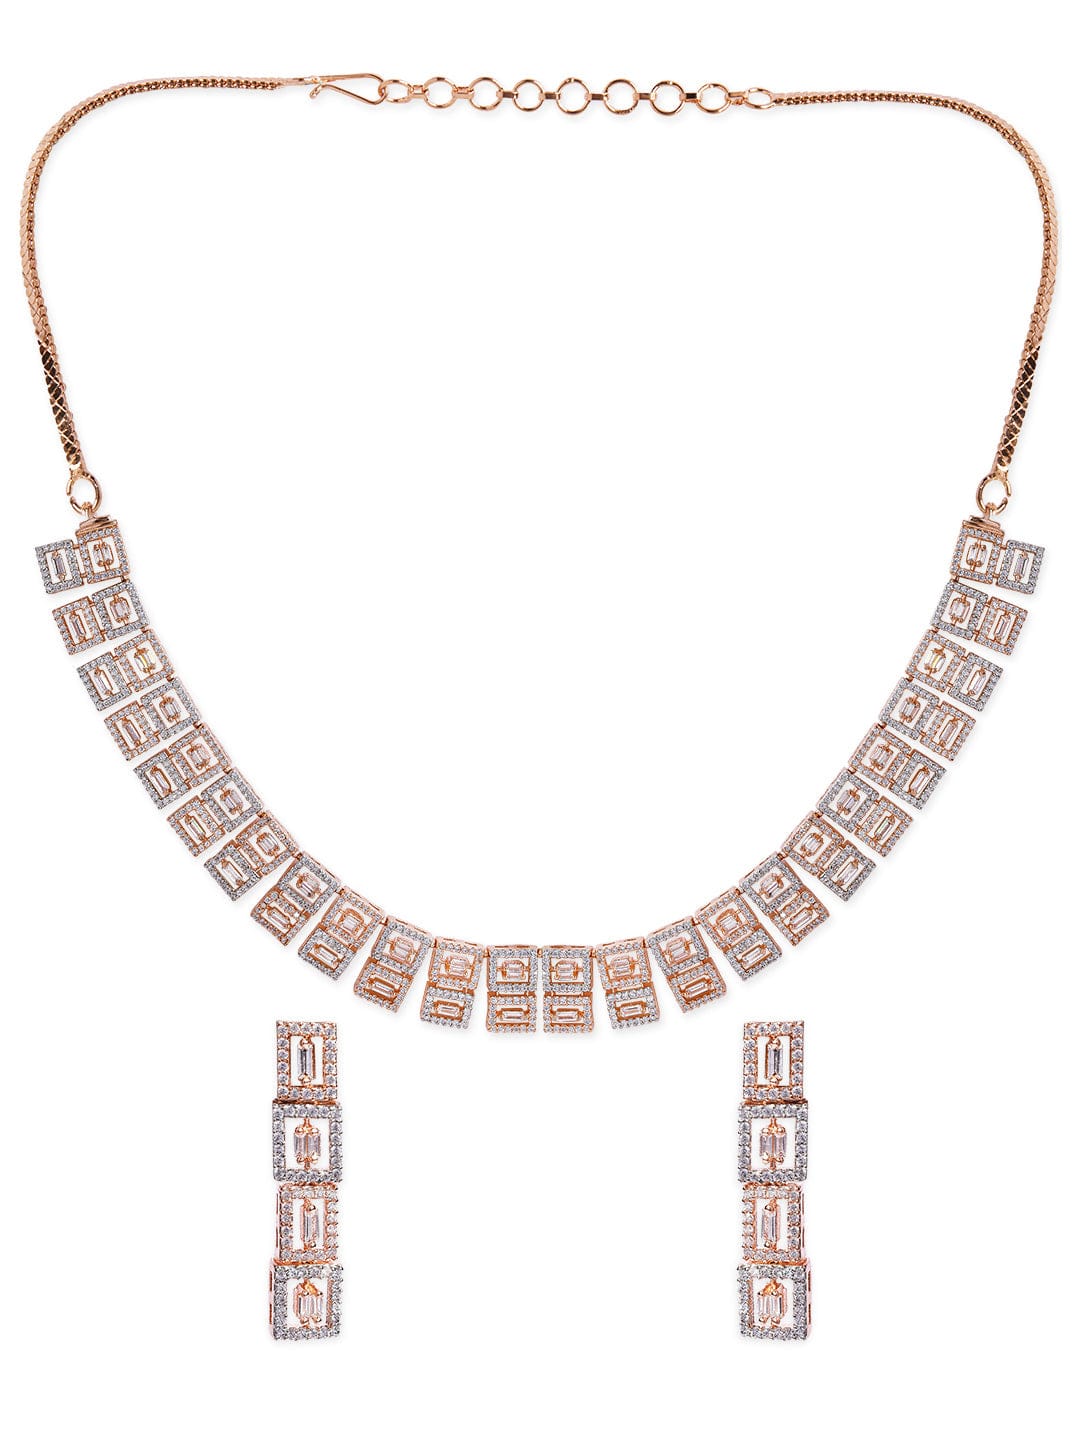 Shop Rubans Rose Gold Plated Necklace Set With American Diamonds. Online at Rubans